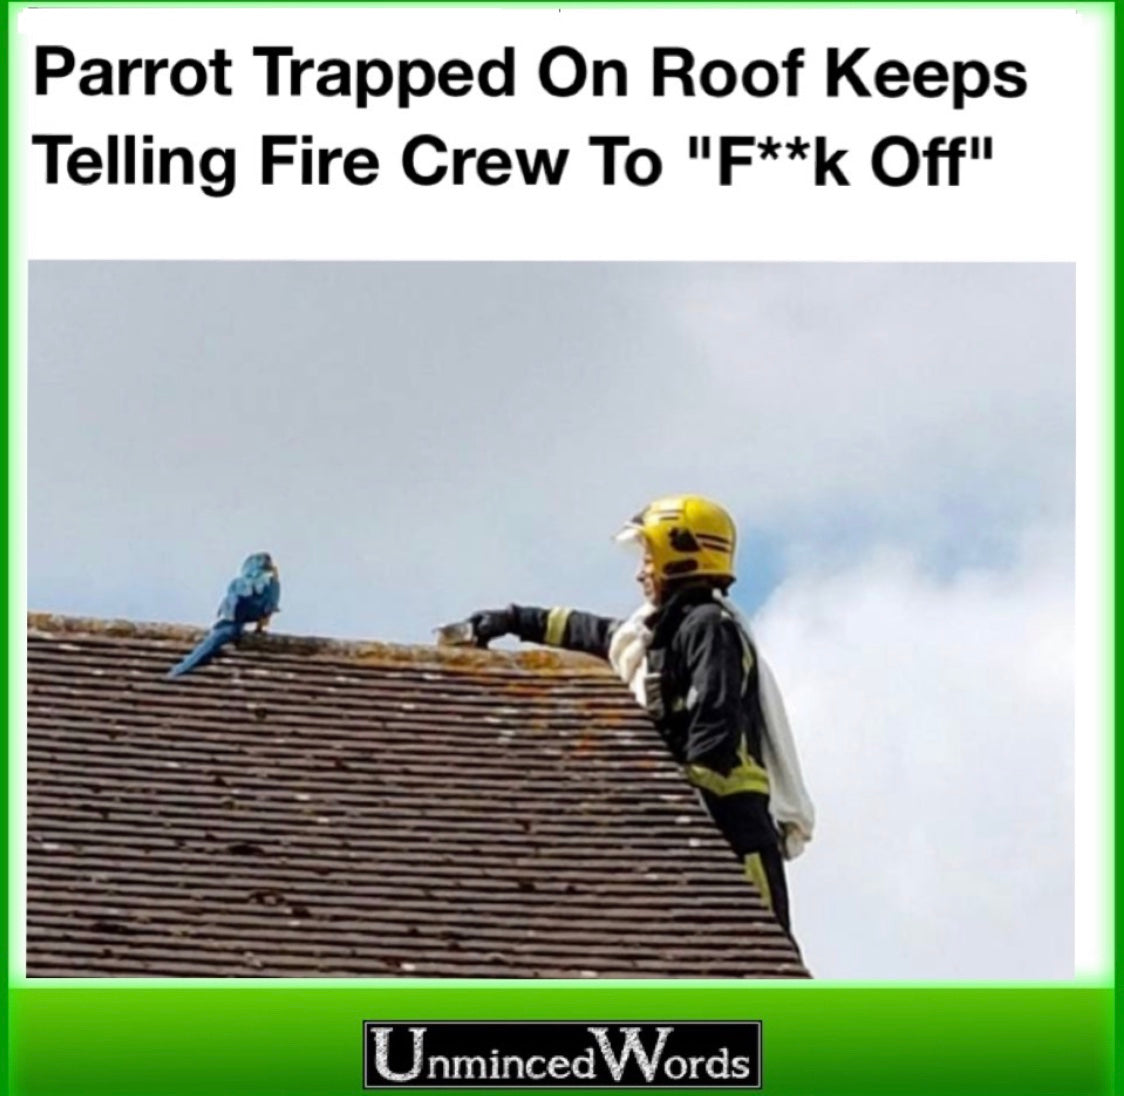 Parrot trapped on roof keeps telling fireman to fuck off